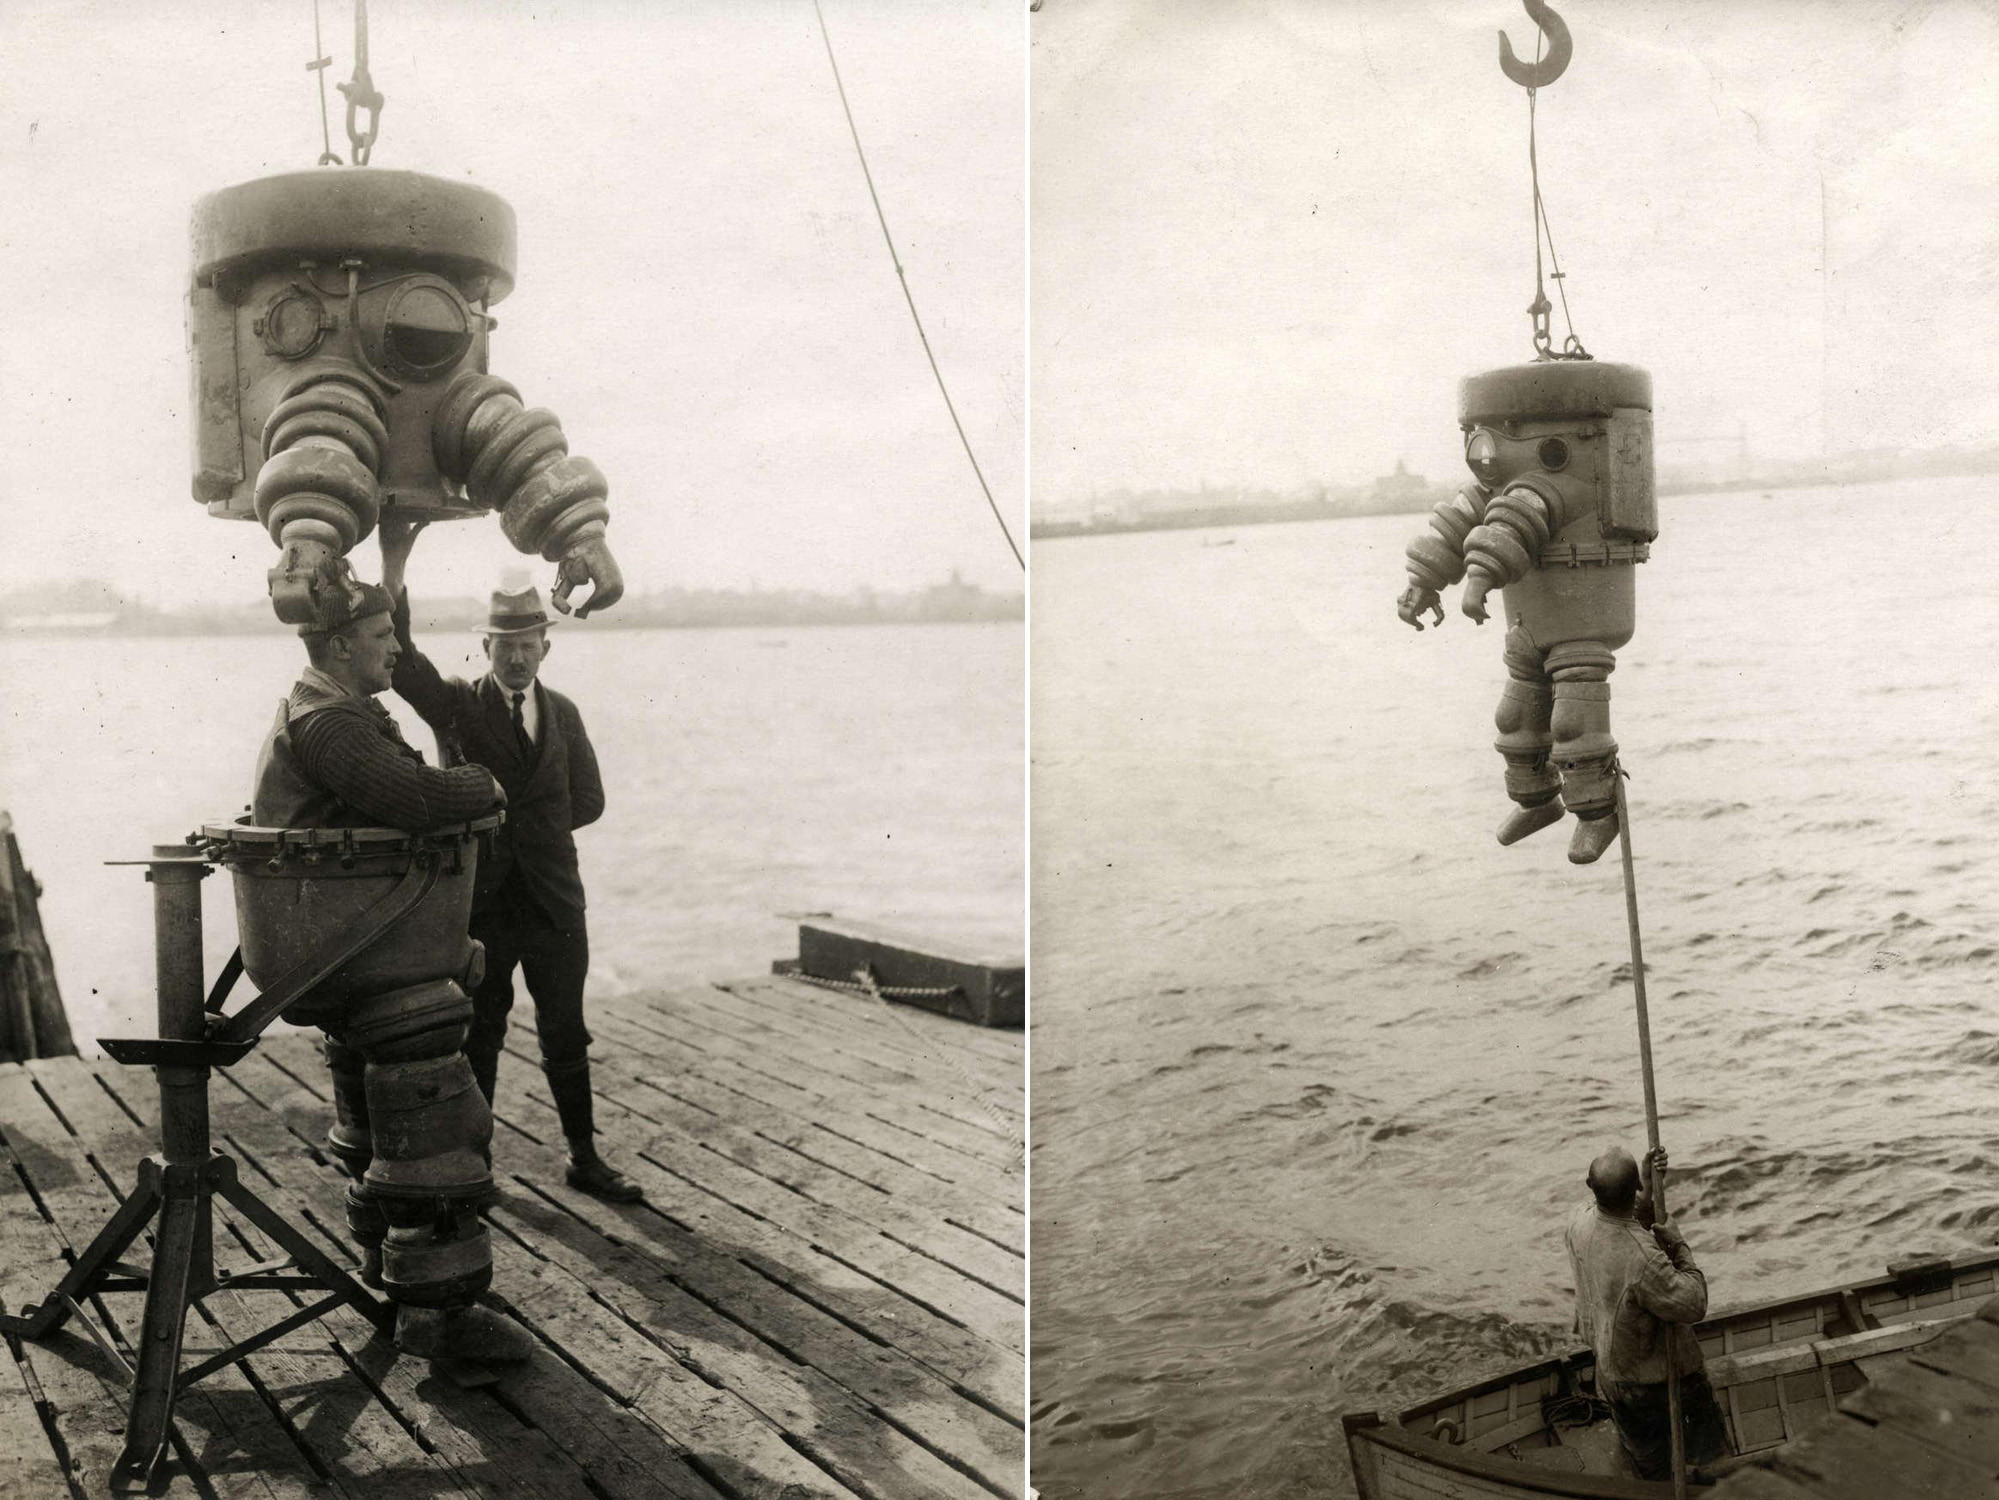 A man puts on his diving suit that was made by the Neufeldt & Kuhnke company of Kiel, Germany in 1922. Most early diving suits were huge metal suits, and were incredibly heavy. As this picture shows, the diver is unable to move in the suit outside of water since it is so bulky and heavy. Salvage and repair were often the reason for diving suits, and testing them was dangerous, with numerous fatalities due to failure as well as communication with someone in such a suit below water was incredibly difficult. Diving suits of these kind are about 200 years old, and are still being adjusted for certain depths to this day.